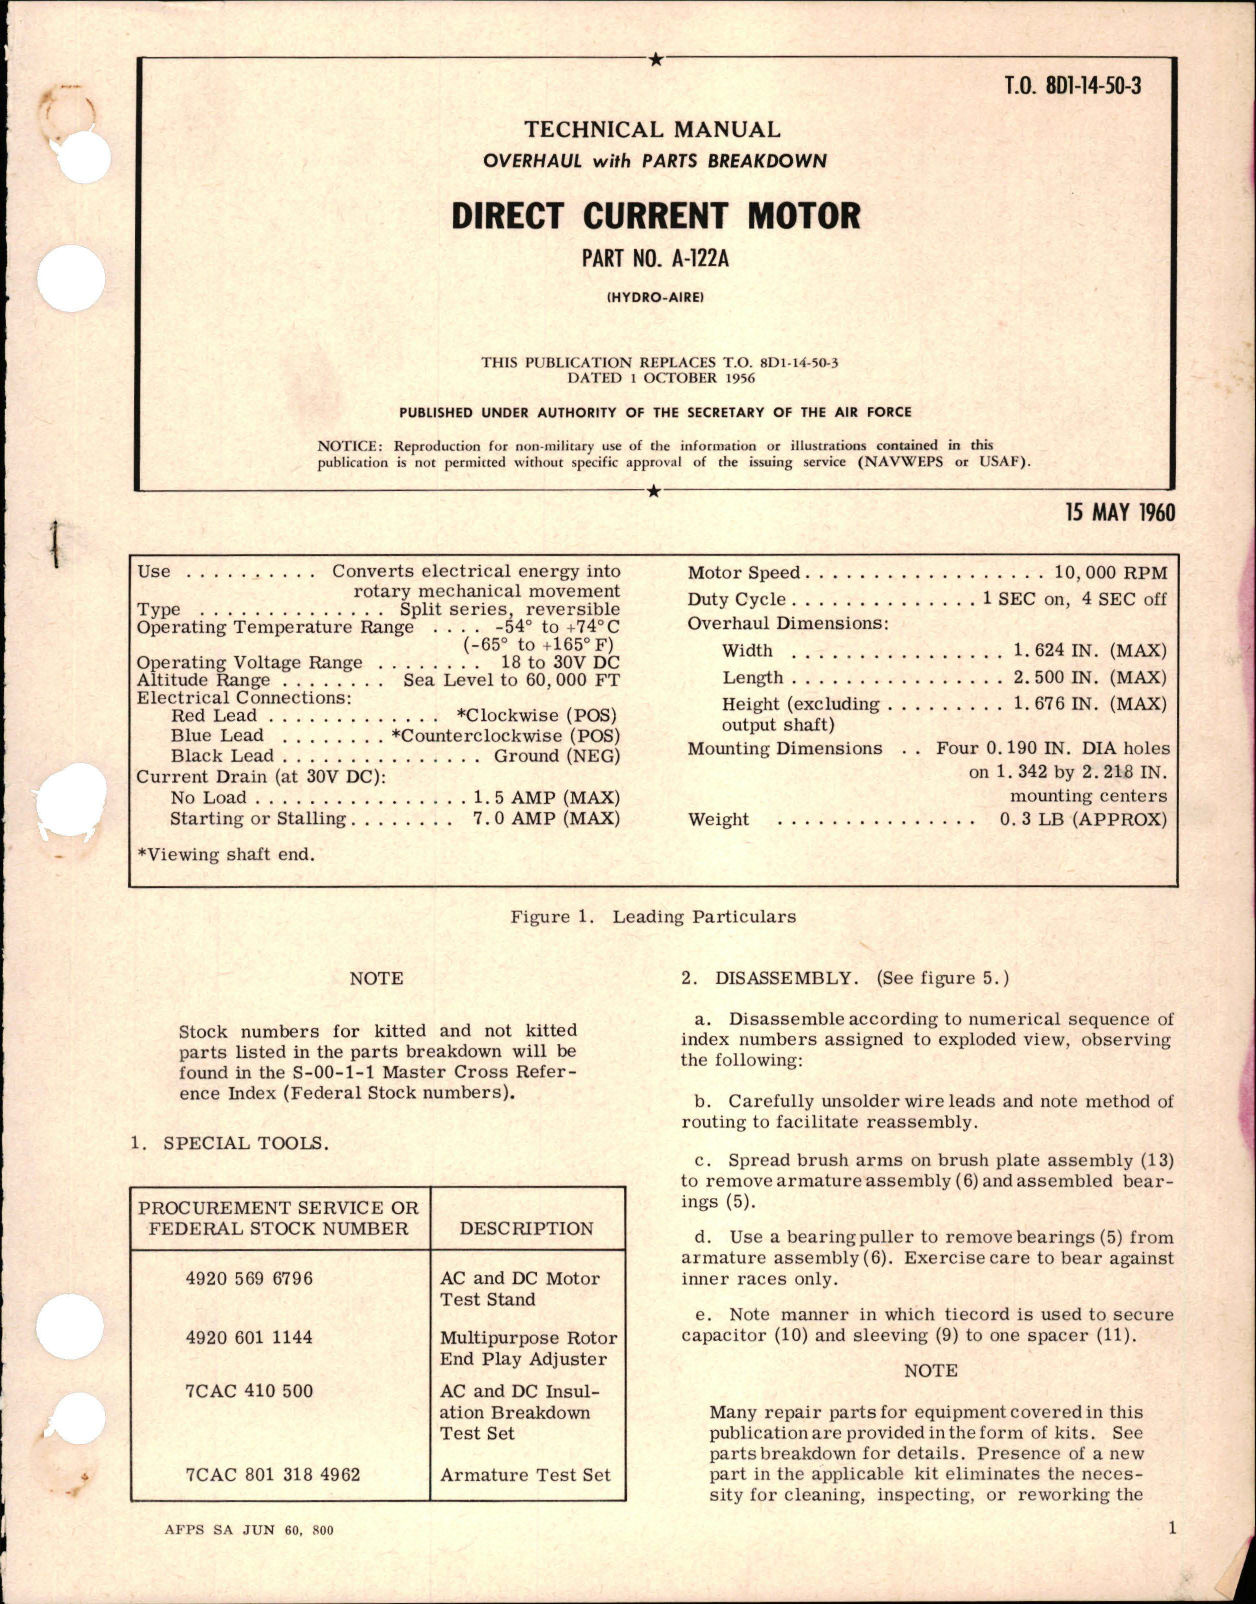 Sample page 1 from AirCorps Library document: Overhaul with Parts Breakdown for Direct Current Motor - Part A-122A